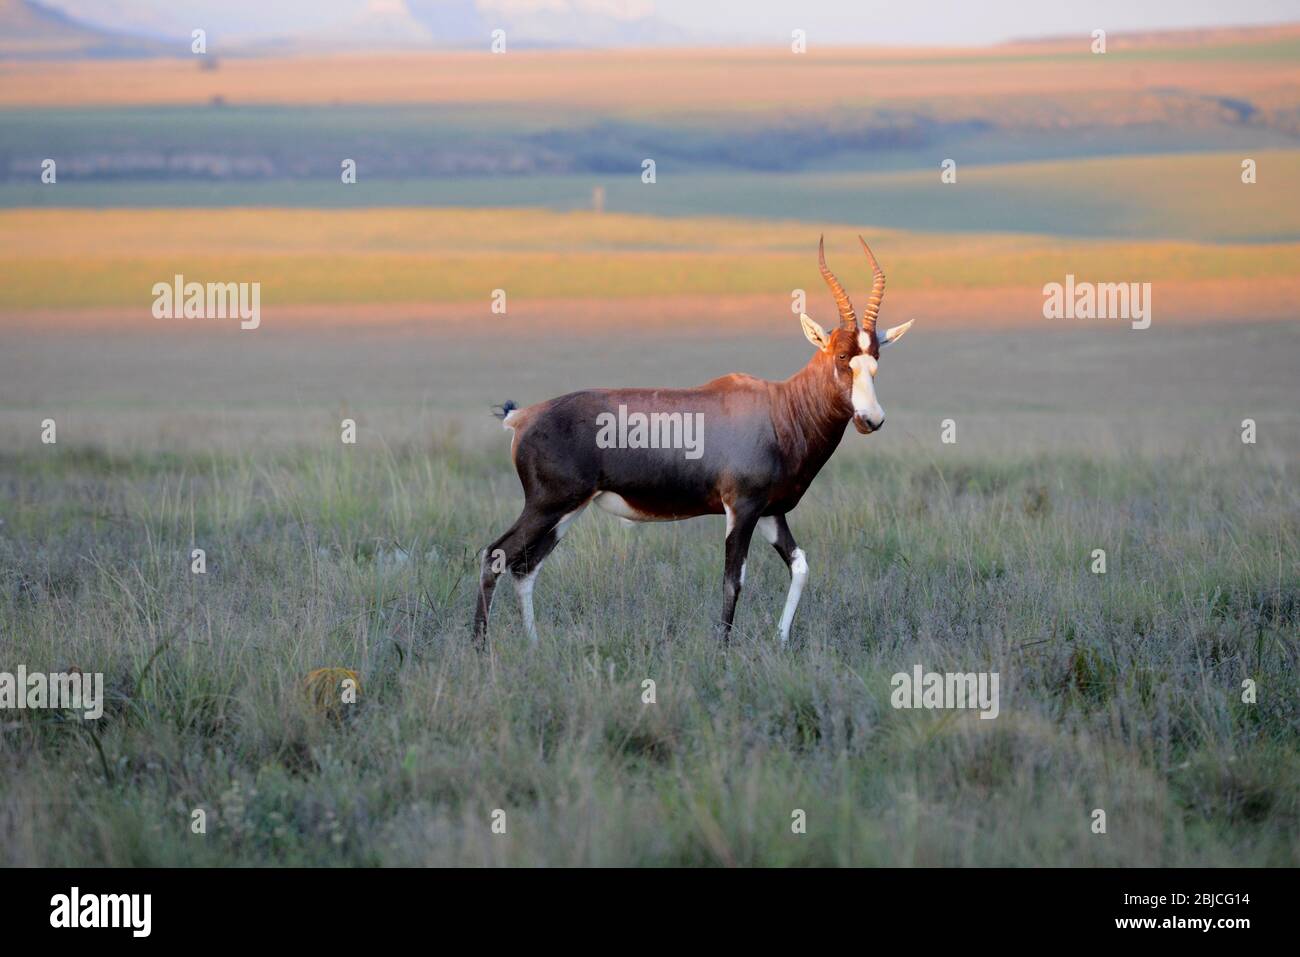 blesbok antelope in grassland of Free State province, South Africa Stock Photo